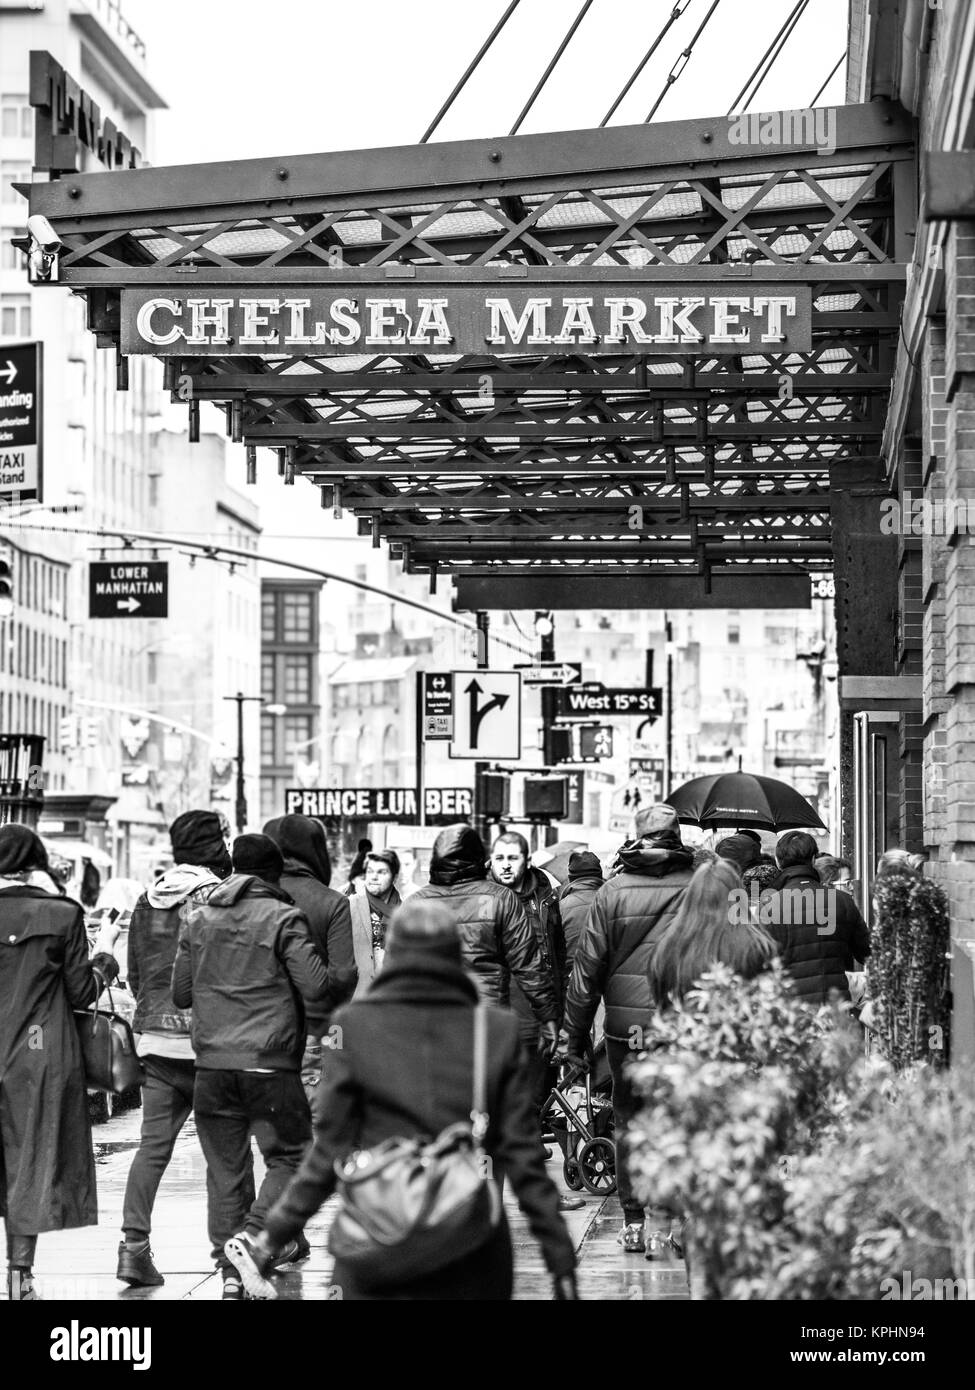 NEW YORK, USA - January 3, 2015: Chelsea Market on 9th avenue. The market has a number of eateries and food outlets. Stock Photo